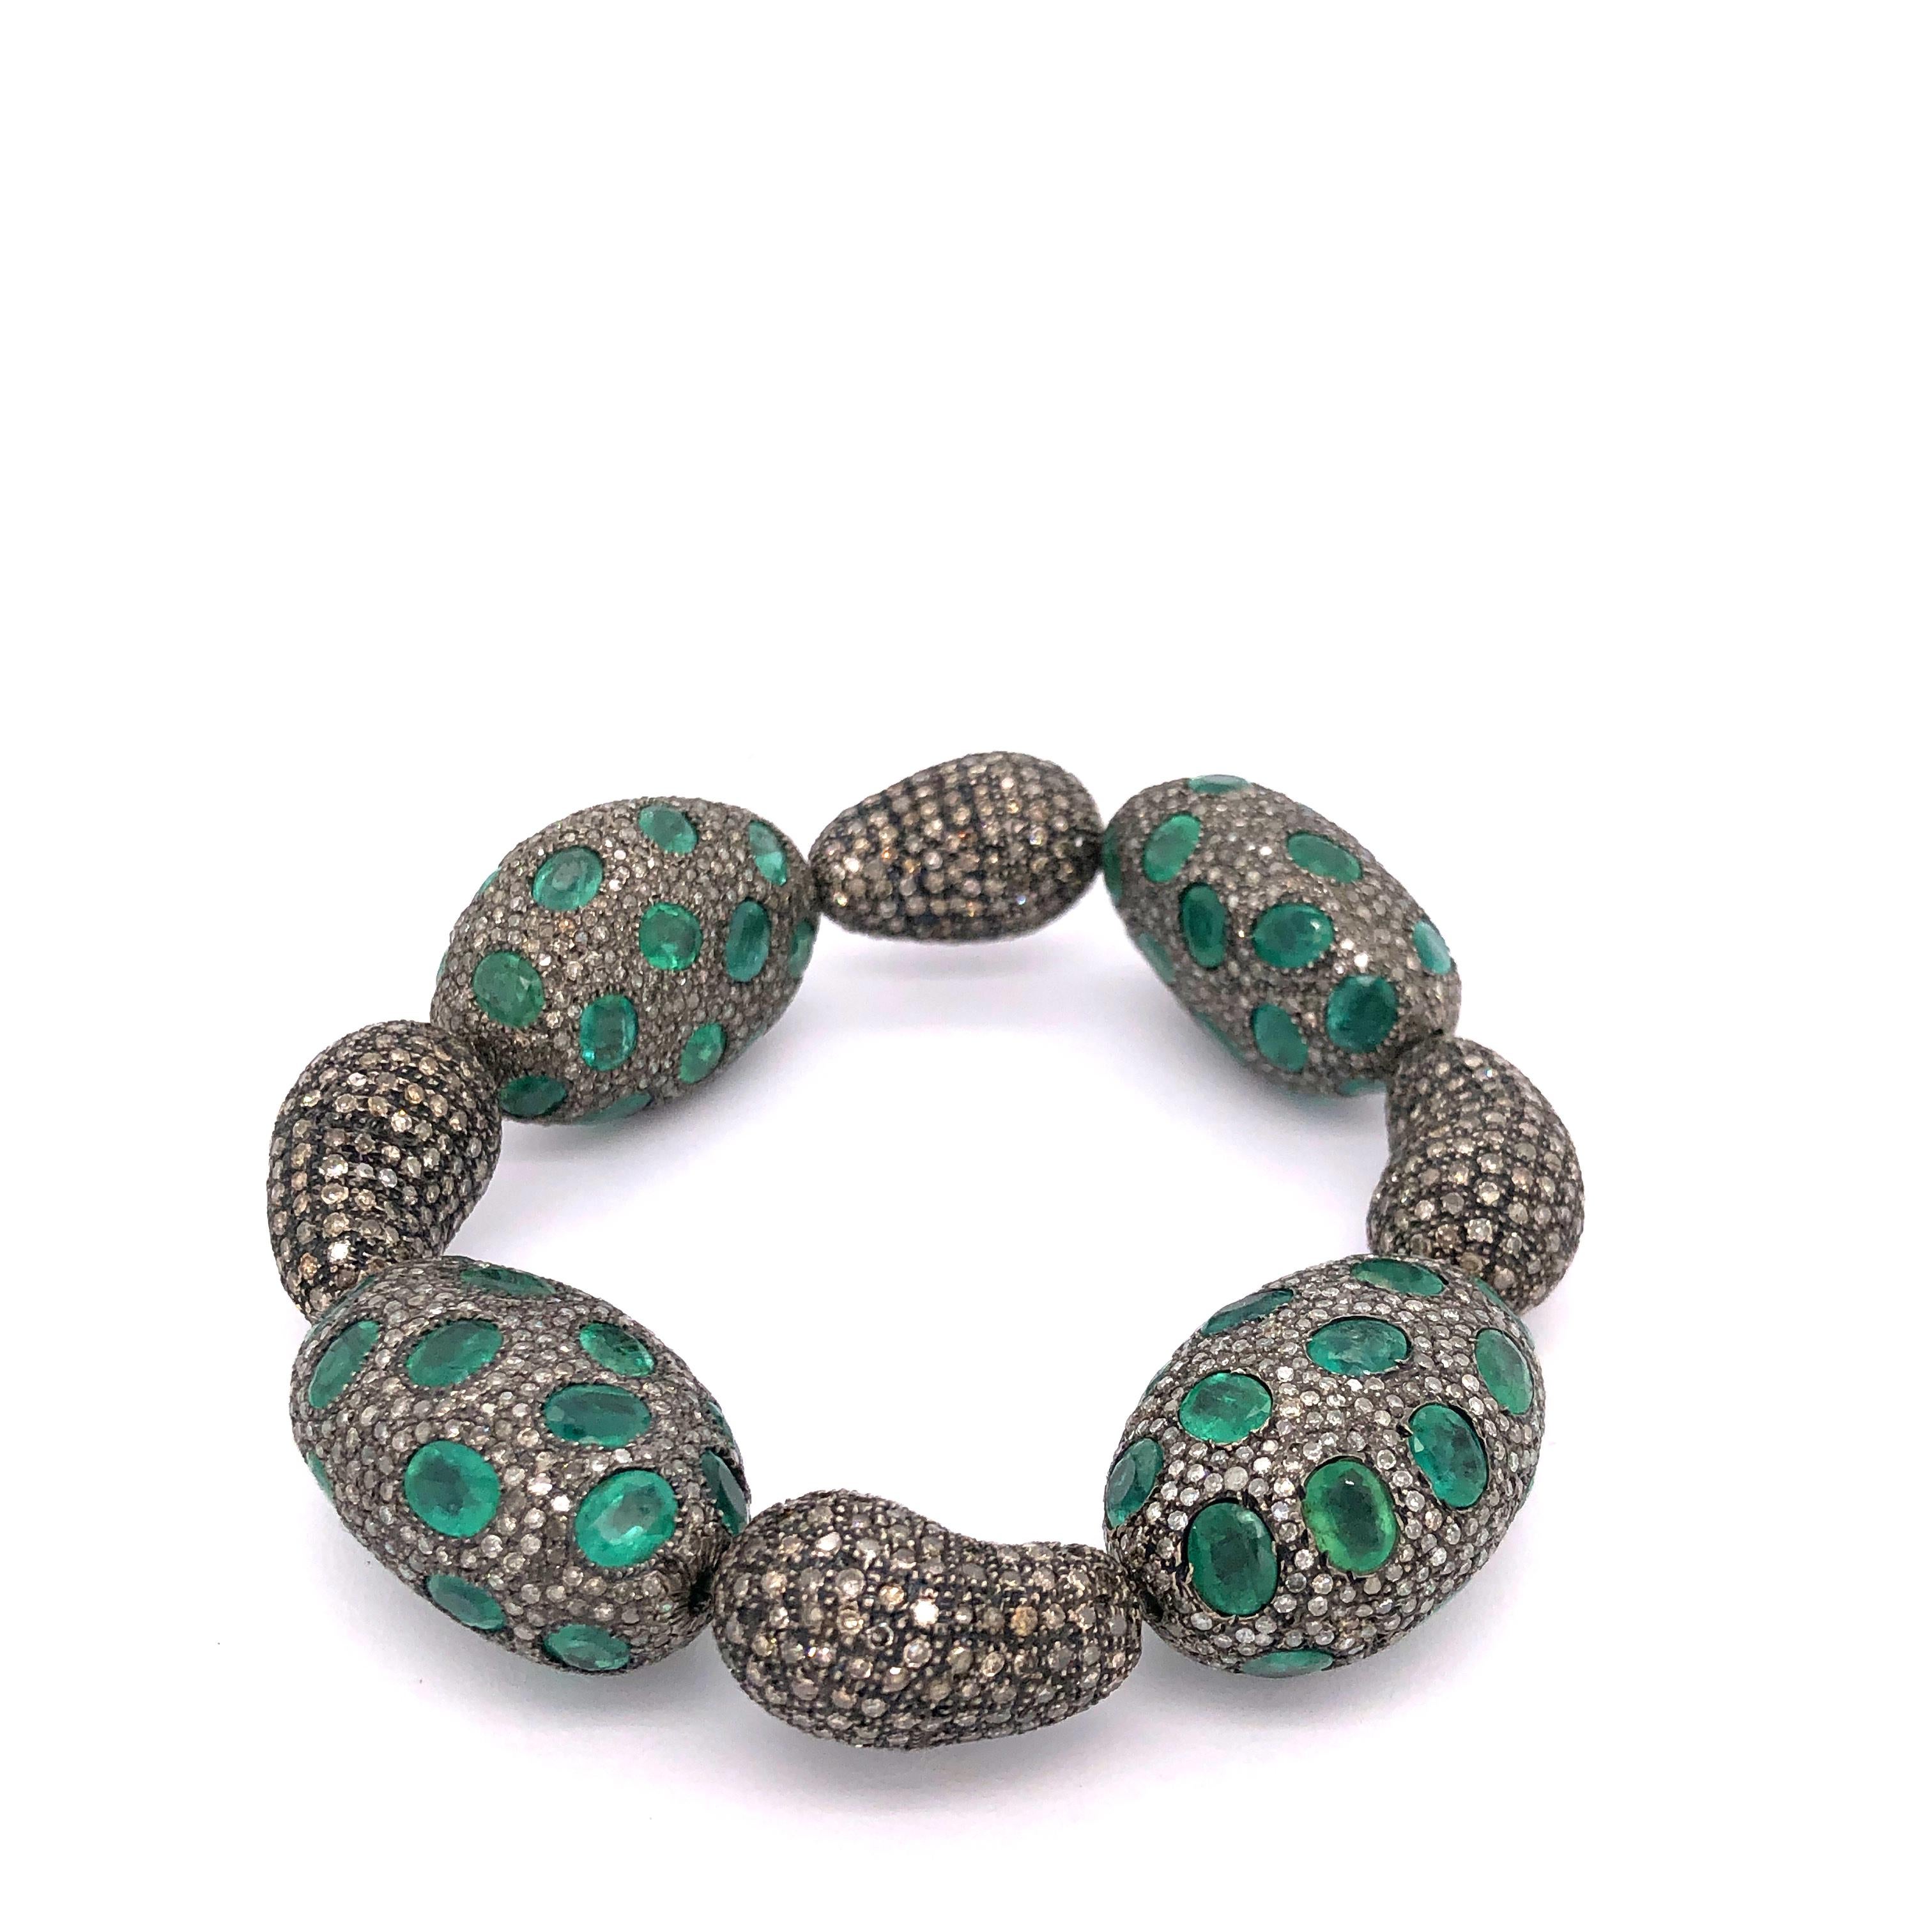 This beautiful pave diamond beads and alternating pave diamond and oval shape emerald bead will complement very well to any of your attire. All the beads are connected together with stretchable plastic cord making easy to slip on.

Silver: